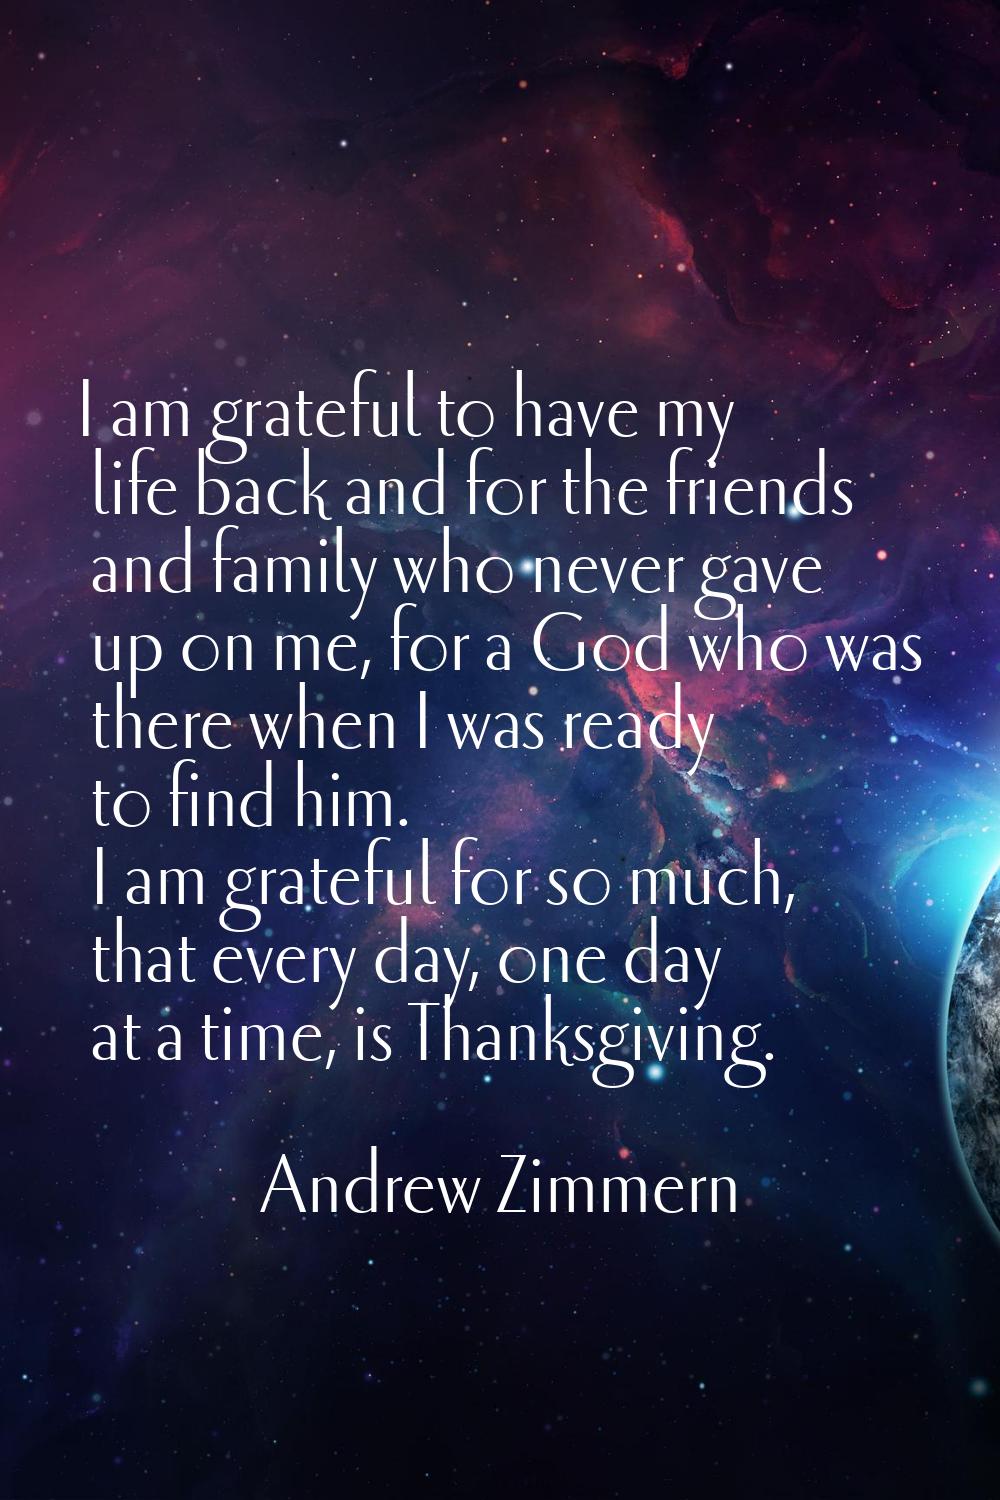 I am grateful to have my life back and for the friends and family who never gave up on me, for a Go